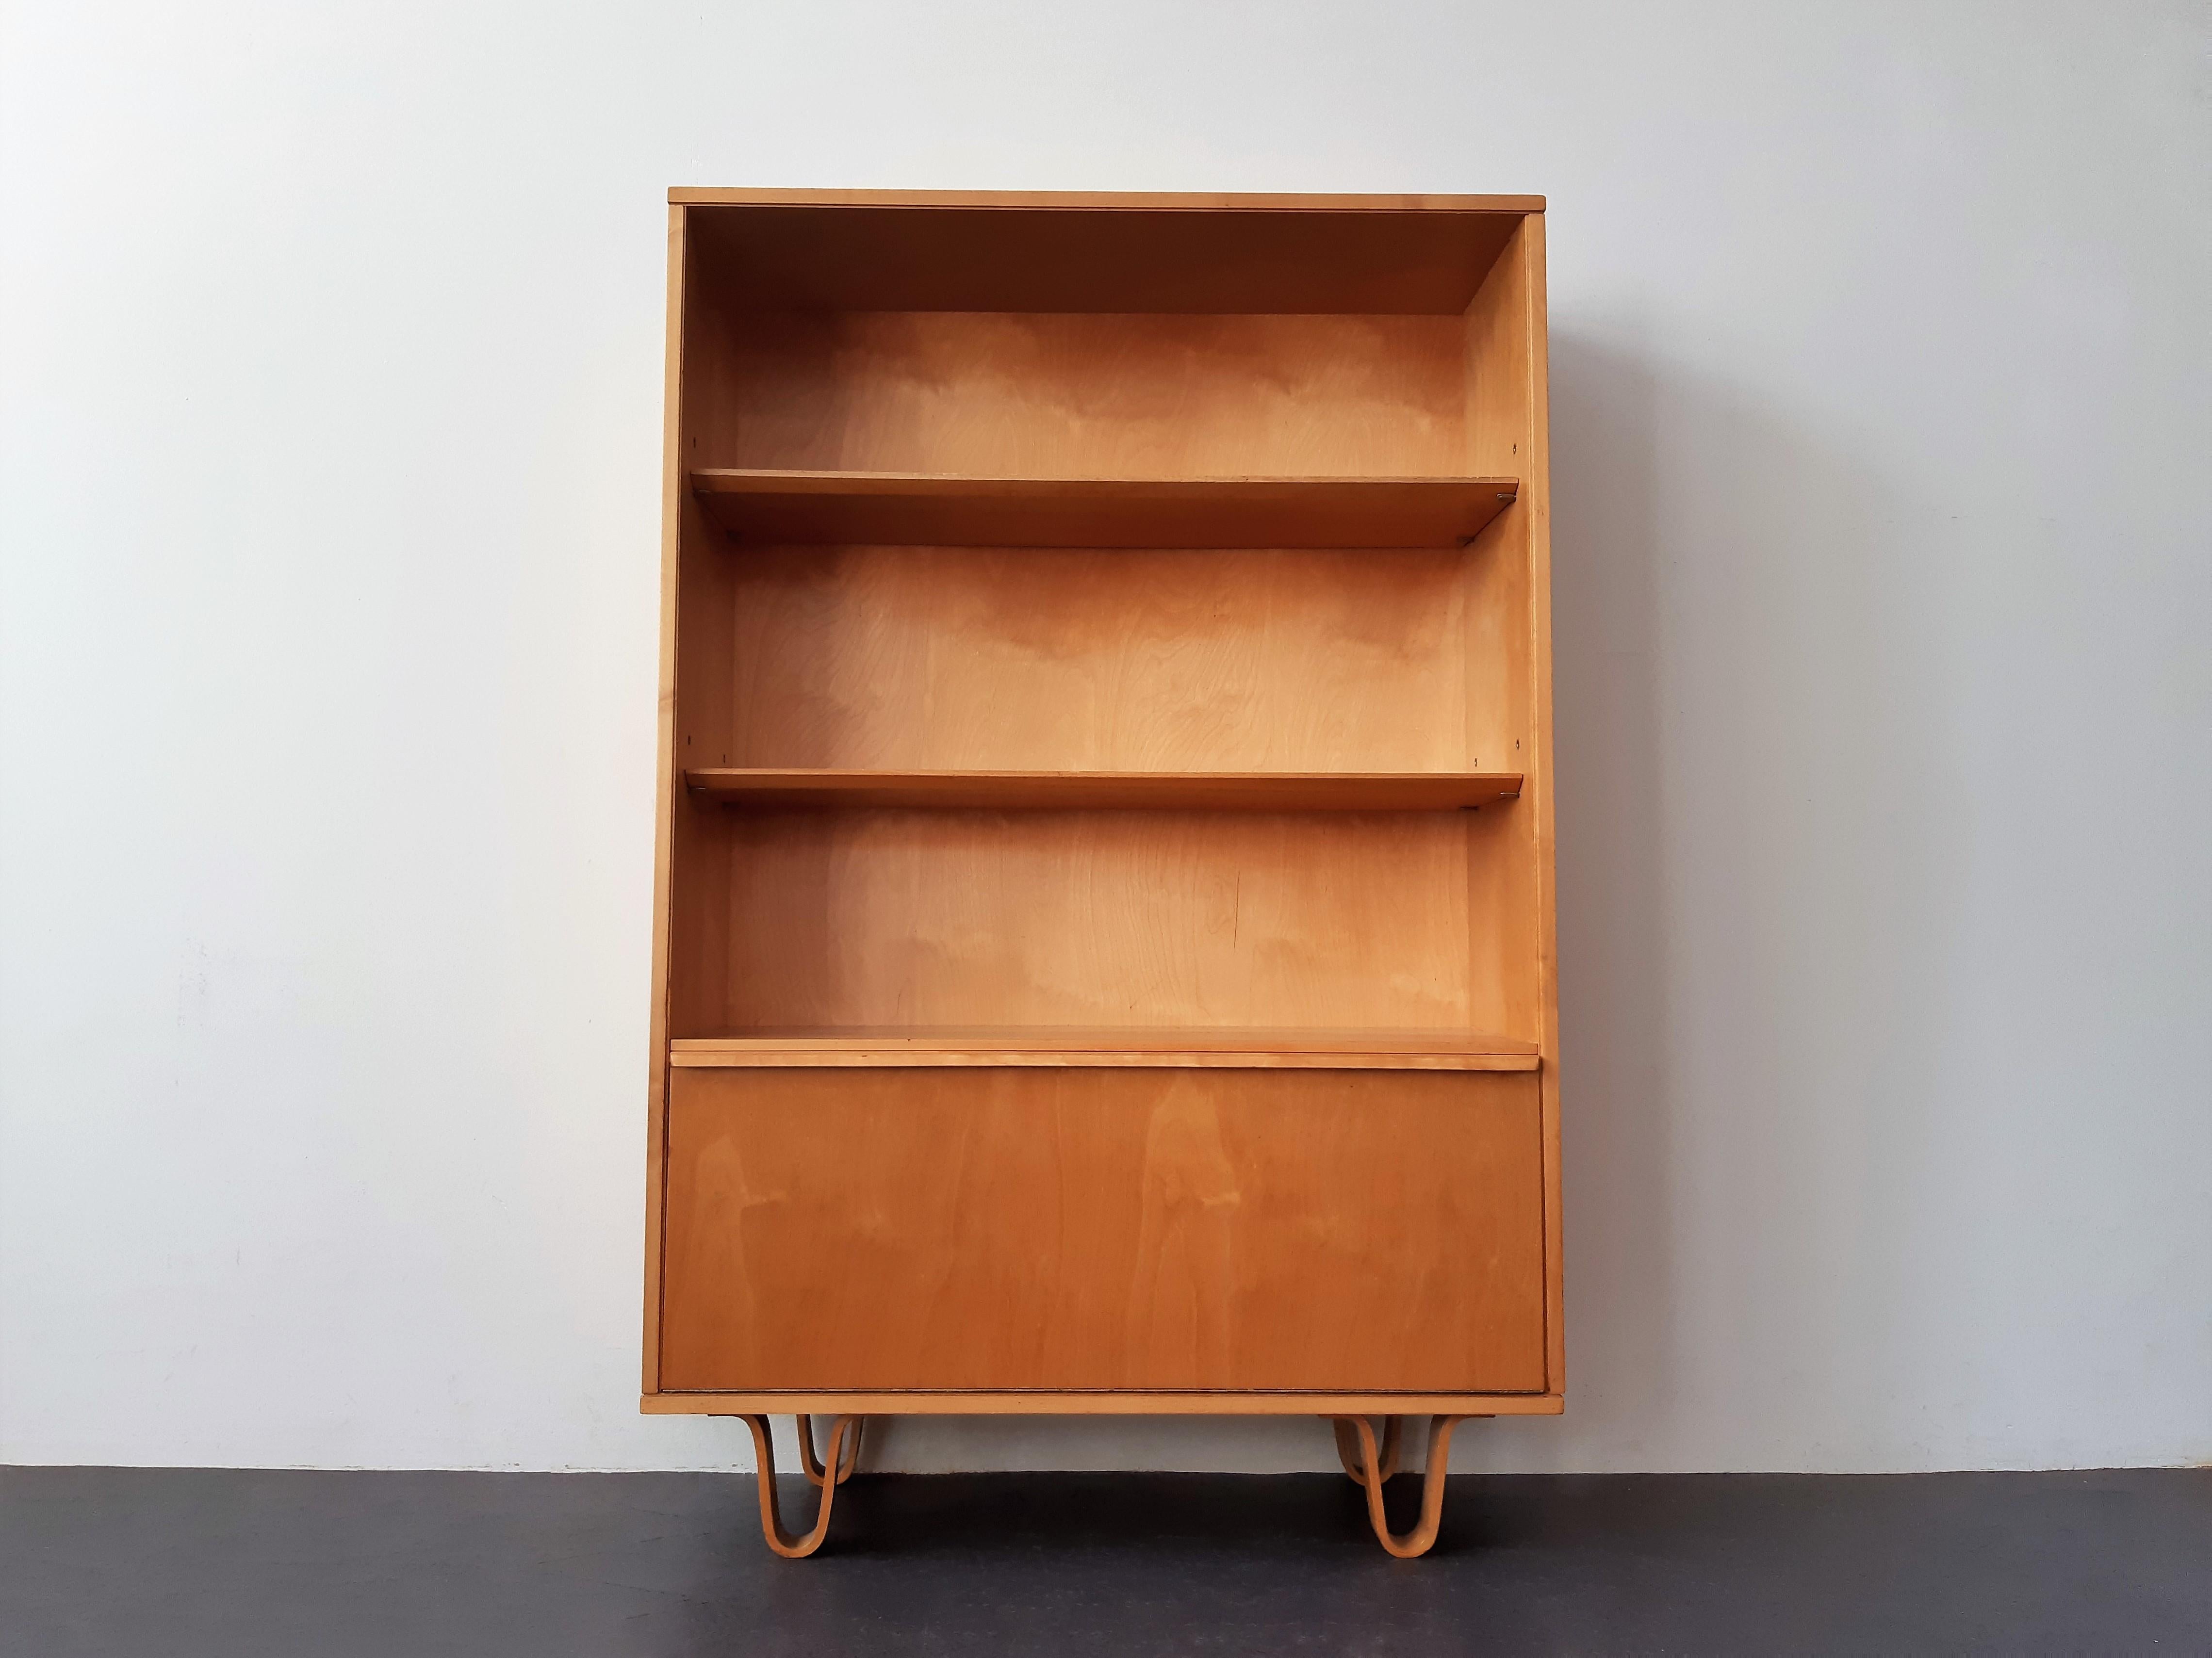 This is the BB-03 cabinet of the famous 'Birch'-series from the 1950's by Cees Braakman for Pastoe. Generally used as a bookcase. It has 2 shelves and a flap door at the bottom for storage. It has the famous bended plywood legs that give this series